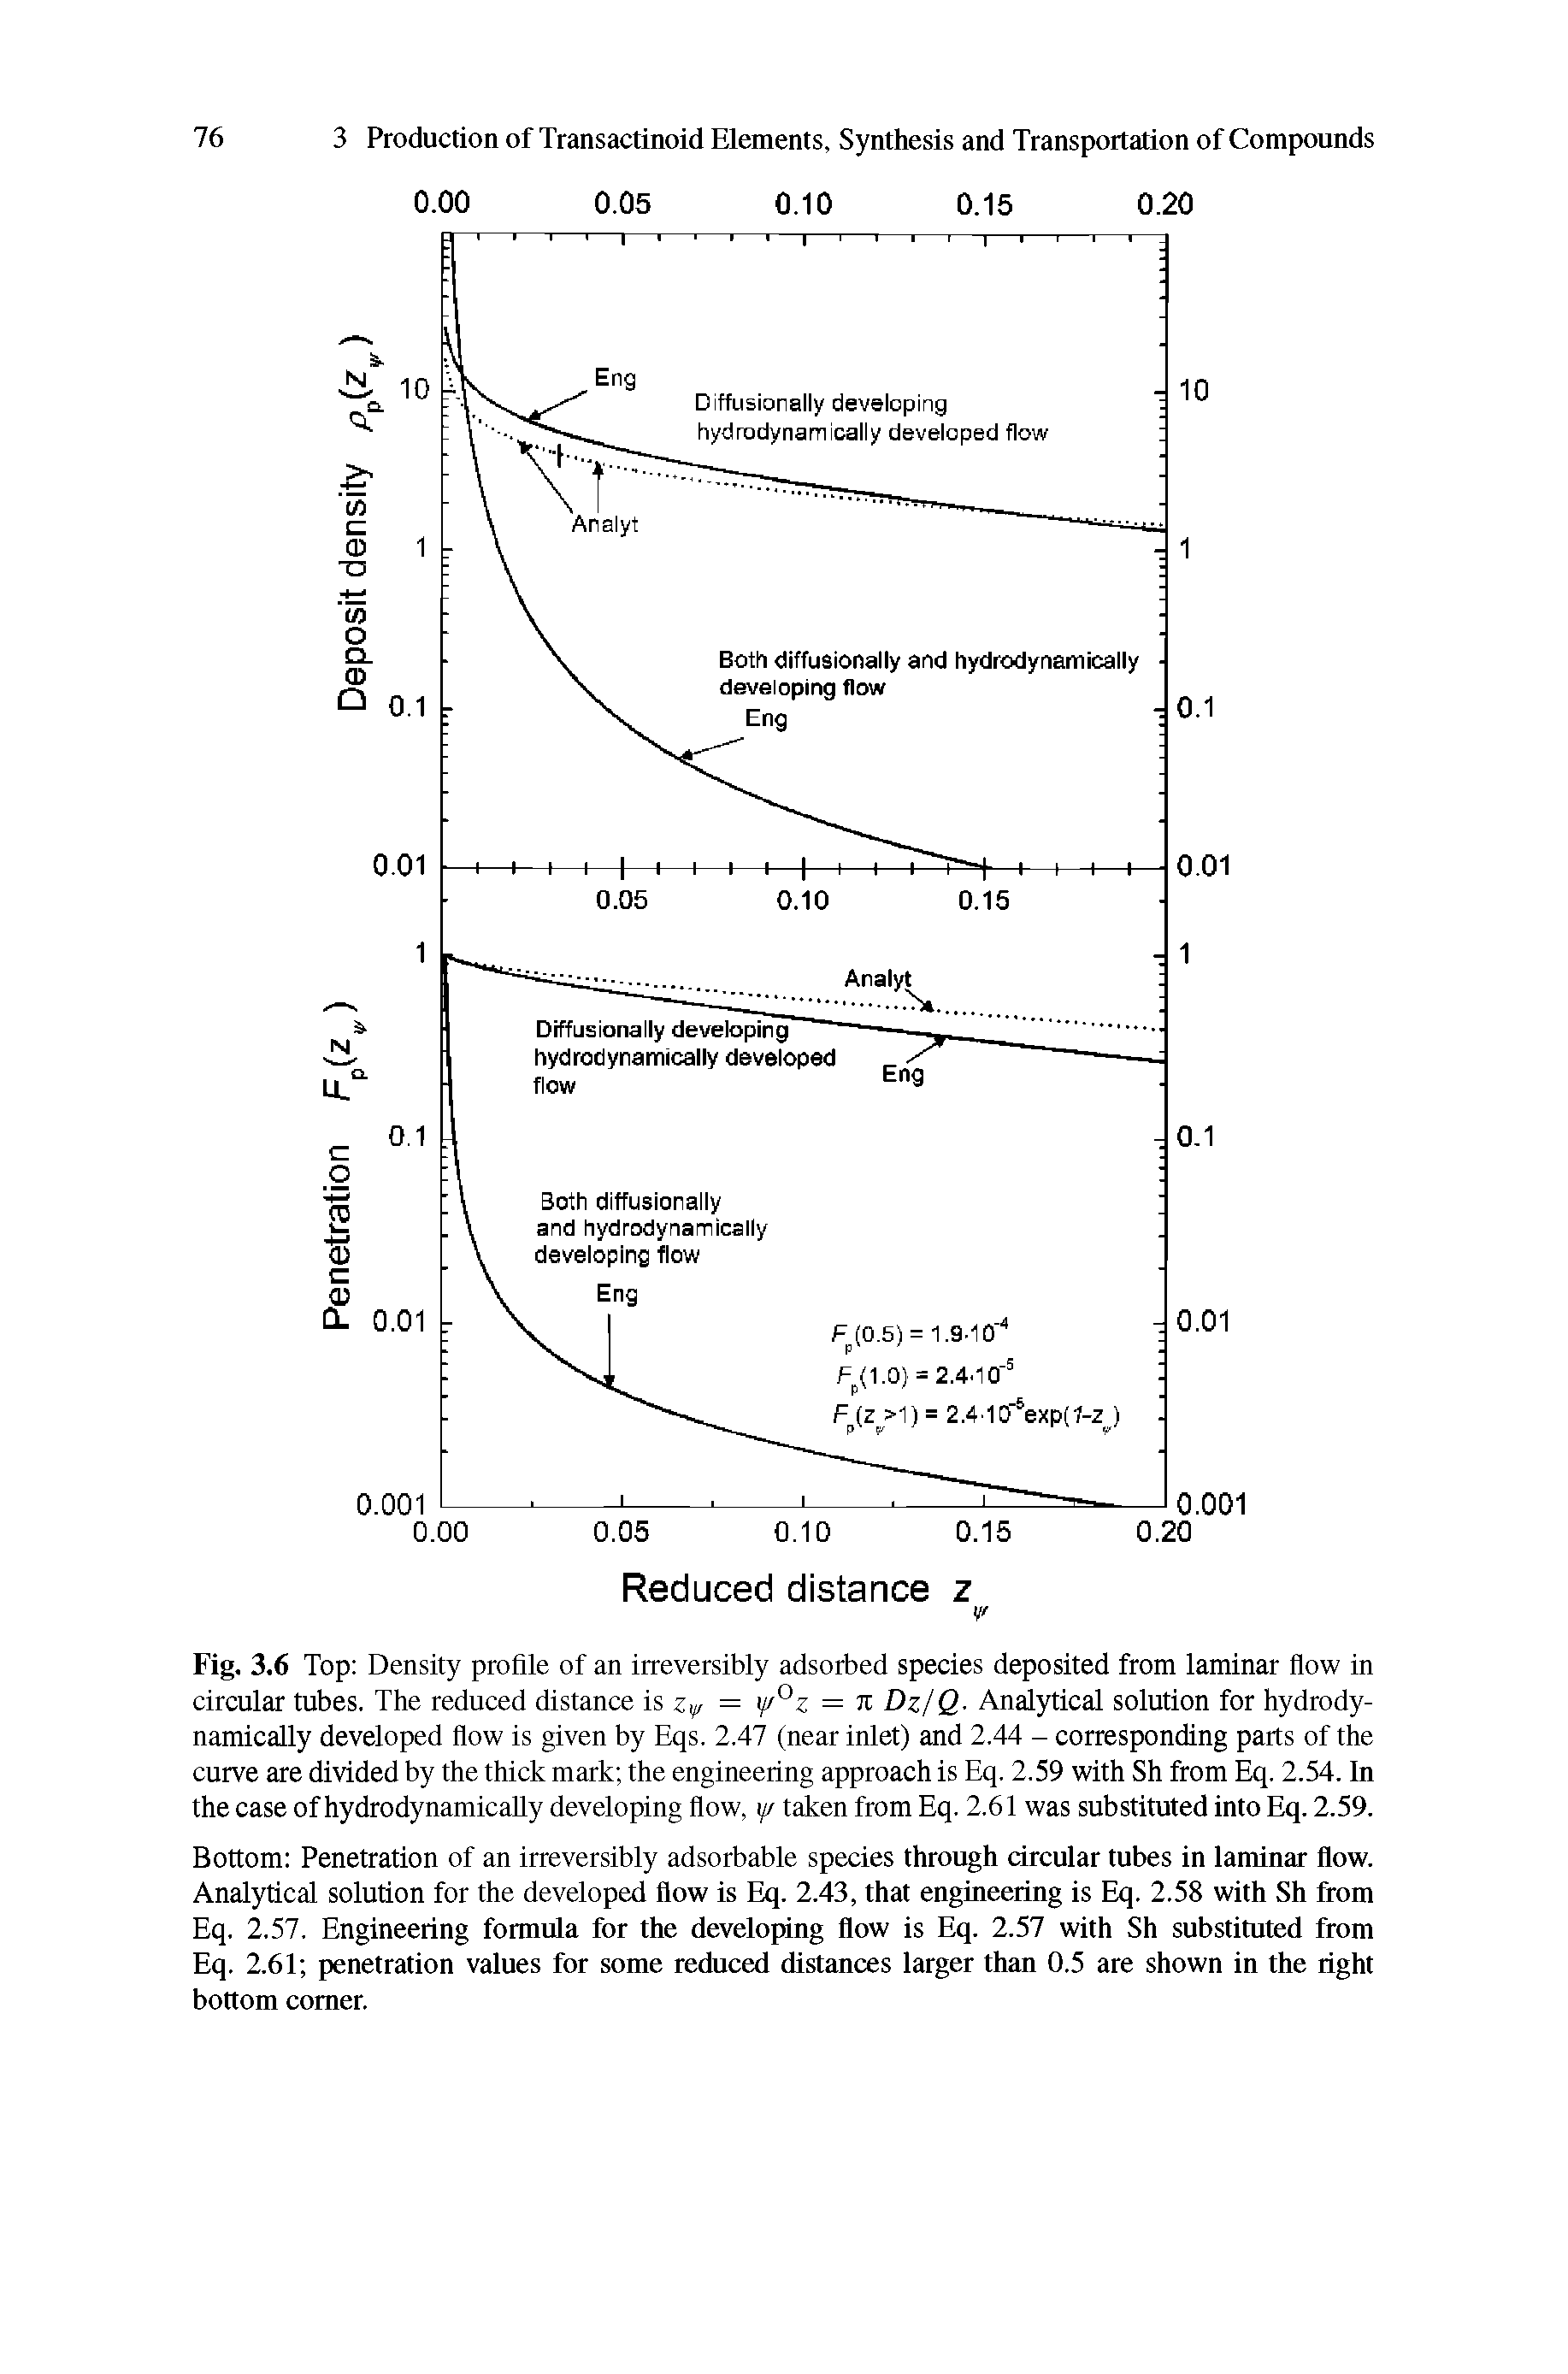 Fig. 3.6 Top Density profile of an irreversibly adsorbed species deposited from laminar flow in circular tubes. The reduced distance is z = tf/°z = Jt Dz/Q Analytical solution for hydrody-namically developed flow is given by Eqs. 2.47 (near inlet) and 2.44 - corresponding parts of the curve are divided by the thick mark the engineering approach is Eq. 2.59 with Sh from Eq. 2.54. In the case of hydrodynamicafly developing flow, i// taken from Eq. 2.61 was substituted into Eq. 2.59.